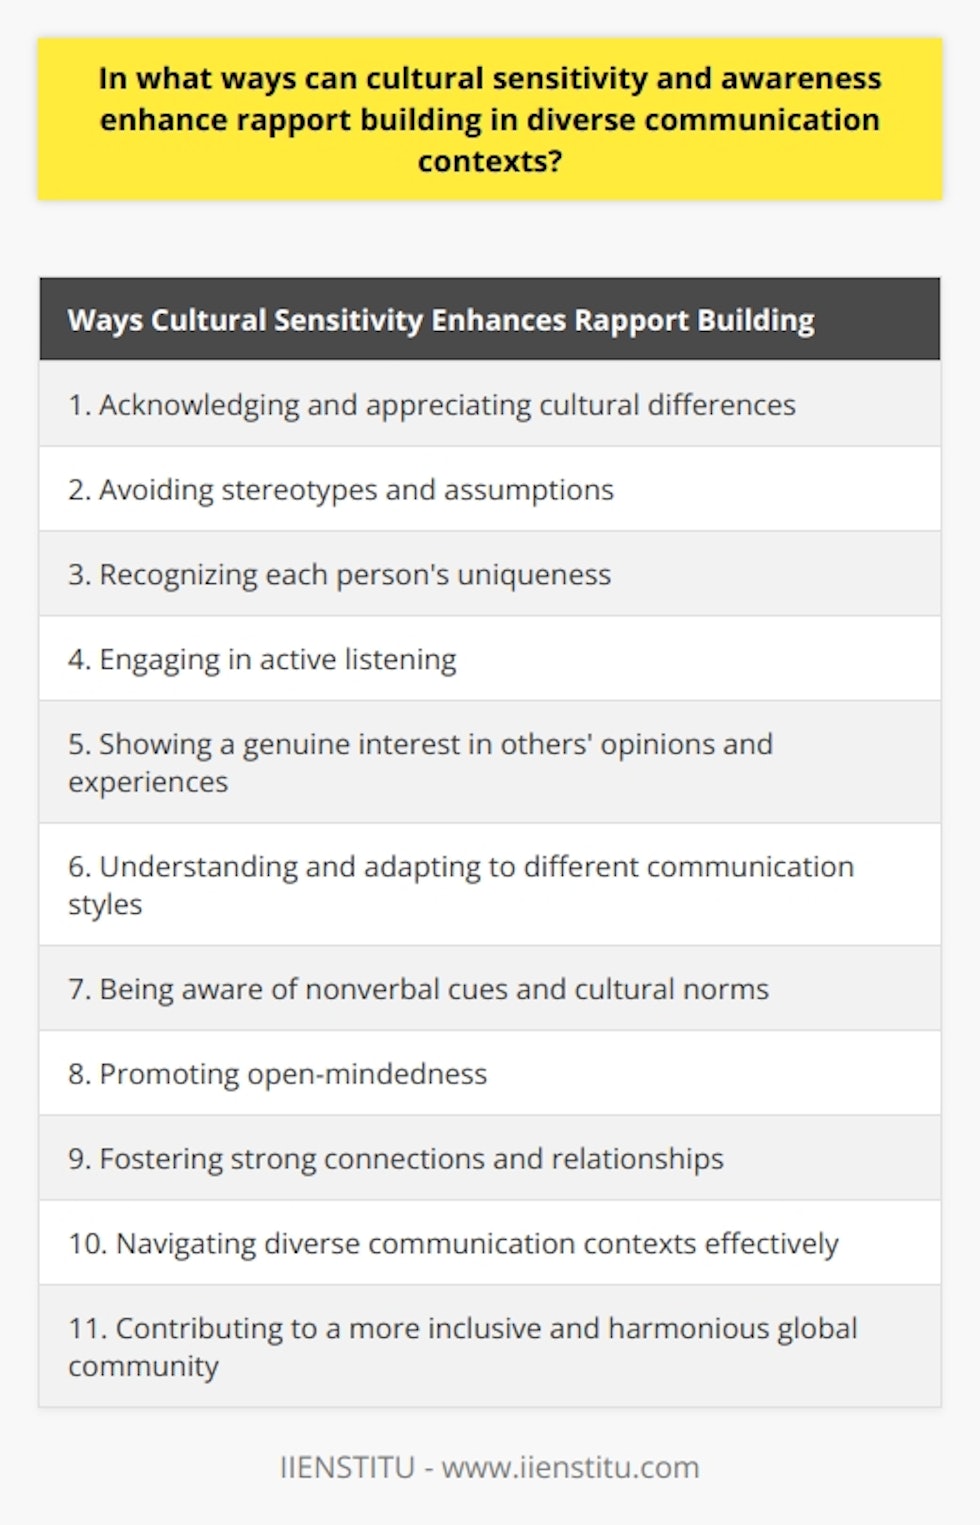 Cultural sensitivity and awareness play a vital role in enhancing rapport building in diverse communication contexts. When individuals acknowledge and appreciate cultural differences, they can establish strong connections, foster mutual understanding, and facilitate effective communication. Avoiding stereotypes and assumptions about other cultures is crucial. Recognizing that each person is unique, regardless of their cultural background, allows for open-mindedness and respect, leading to more authentic relationships and the exchange of ideas and experiences.Active listening and an open-minded attitude are also essential in enhancing rapport building. By engaging in active listening, individuals can better understand and appreciate different perspectives, leading to empathy and more effective communication. Genuine interest in the opinions and experiences of others accelerates rapport building as all parties feel valued and understood.Understanding and adapting to the communication styles of different cultures significantly enhances rapport building. Some cultures prioritize direct communication, while others prefer indirect communication and high-context messages. Being aware of and respectful of these differing styles promotes clear and effective dialogue, contributing to strong relationships in diverse communication contexts.Nonverbal communication, including body language, facial expressions, and gestures, also plays a role in cultural sensitivity in communication. Being aware of how cultural norms can influence nonverbal cues helps individuals avoid misunderstandings and better interpret their conversation partners' emotions and intentions. This understanding allows for a deeper connection and rapport in diverse communication settings.In conclusion, cultural sensitivity and awareness are vital in enhancing rapport building. By promoting open-mindedness, avoiding stereotypes, adapting communication styles, and understanding nonverbal cues, individuals can foster stronger connections and effectively navigate diverse communication contexts. Ultimately, this contributes to a more inclusive, respectful, and harmonious global community.